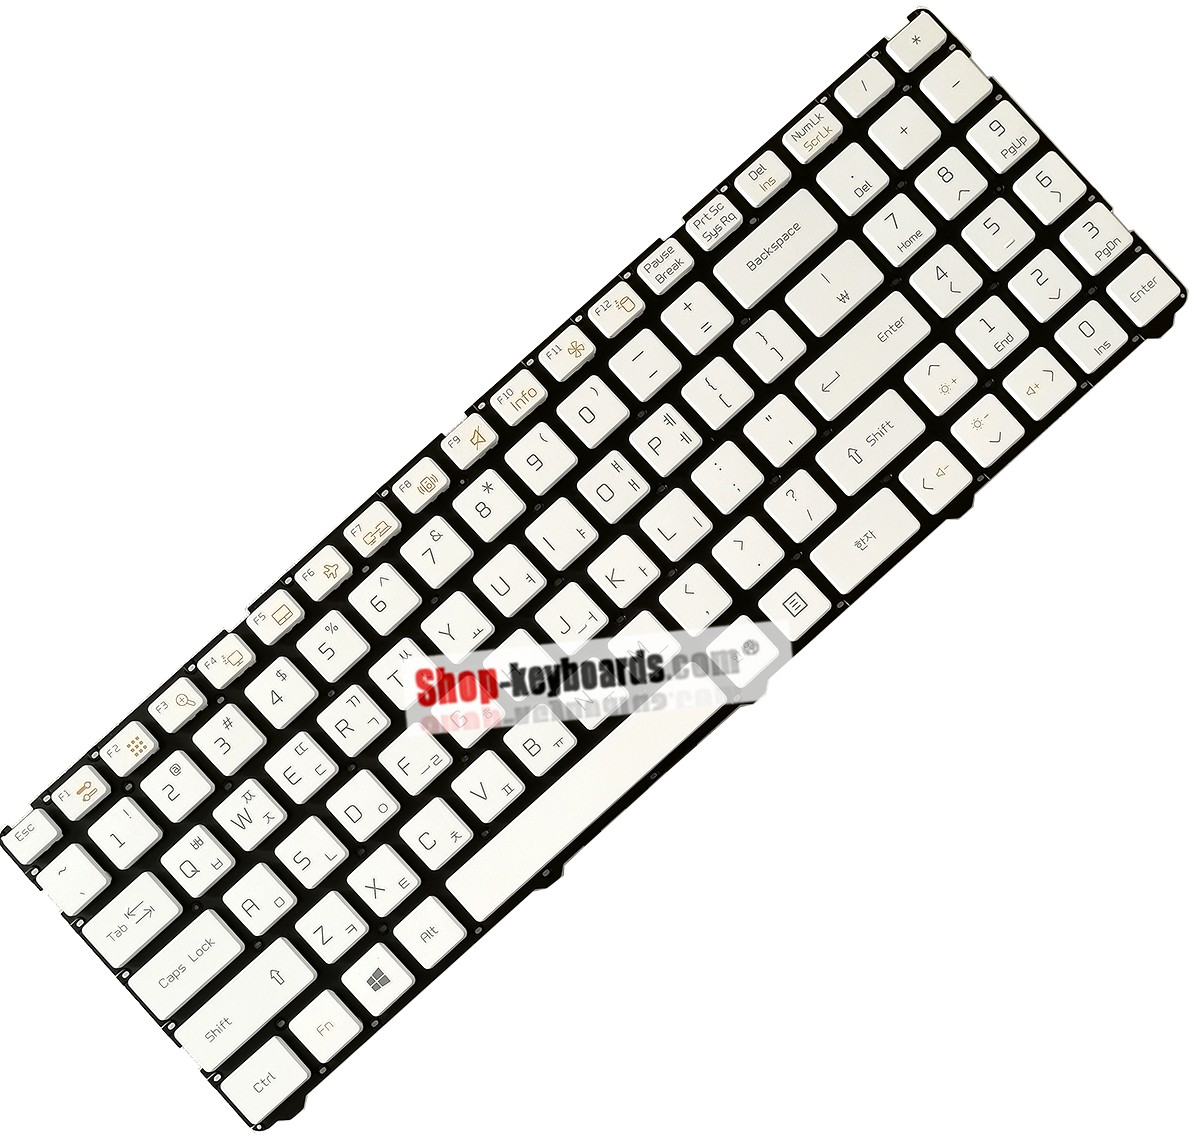 LG 15UD470-KX5SE Keyboard replacement